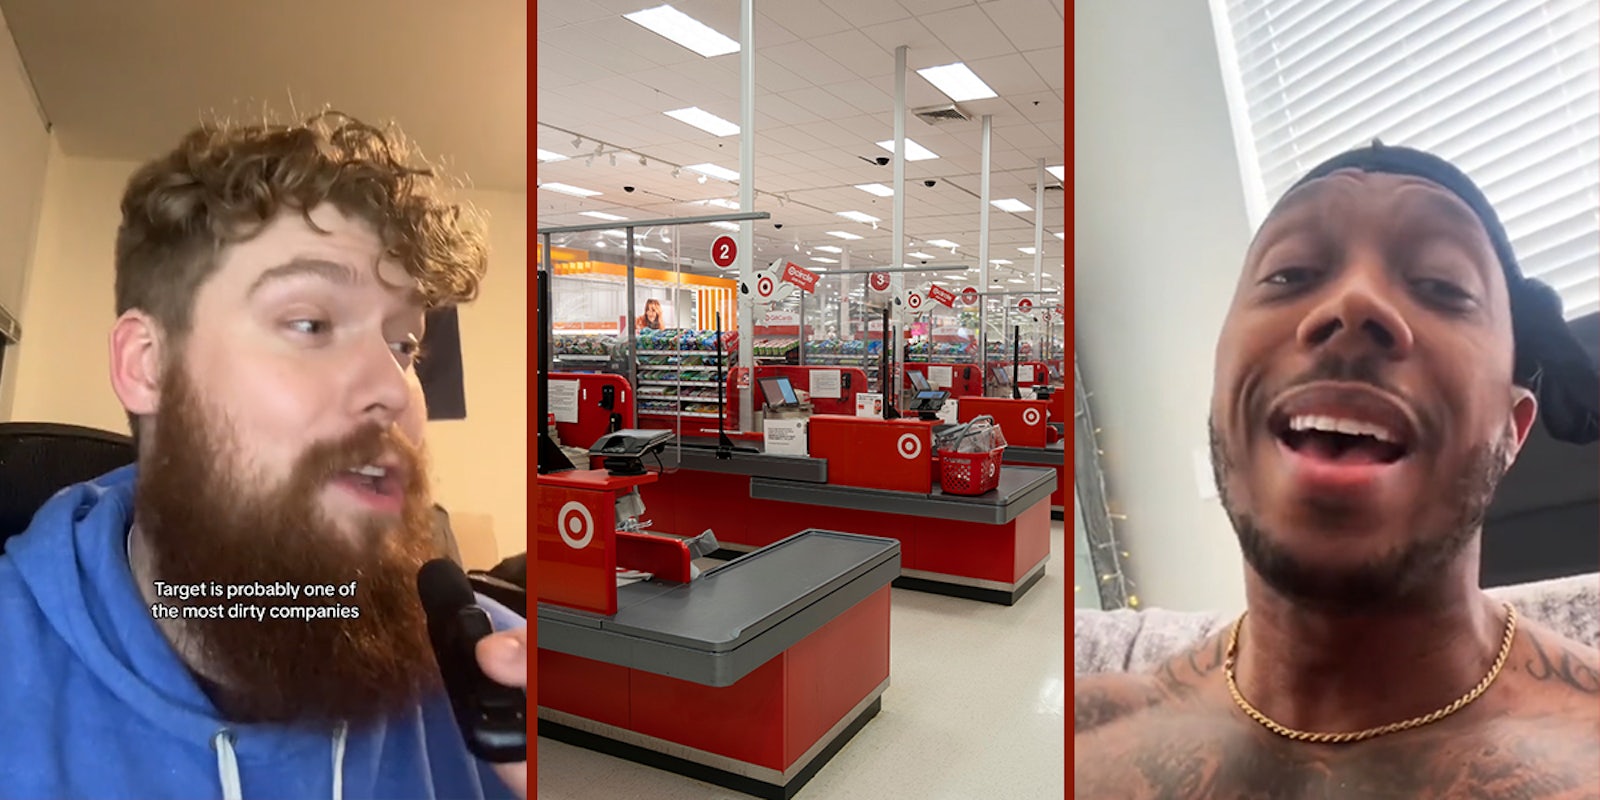 man speaking with caption 'Target is probably one of the most dirty companies' (l) Target checkout (c) Target cashier speaking (r)